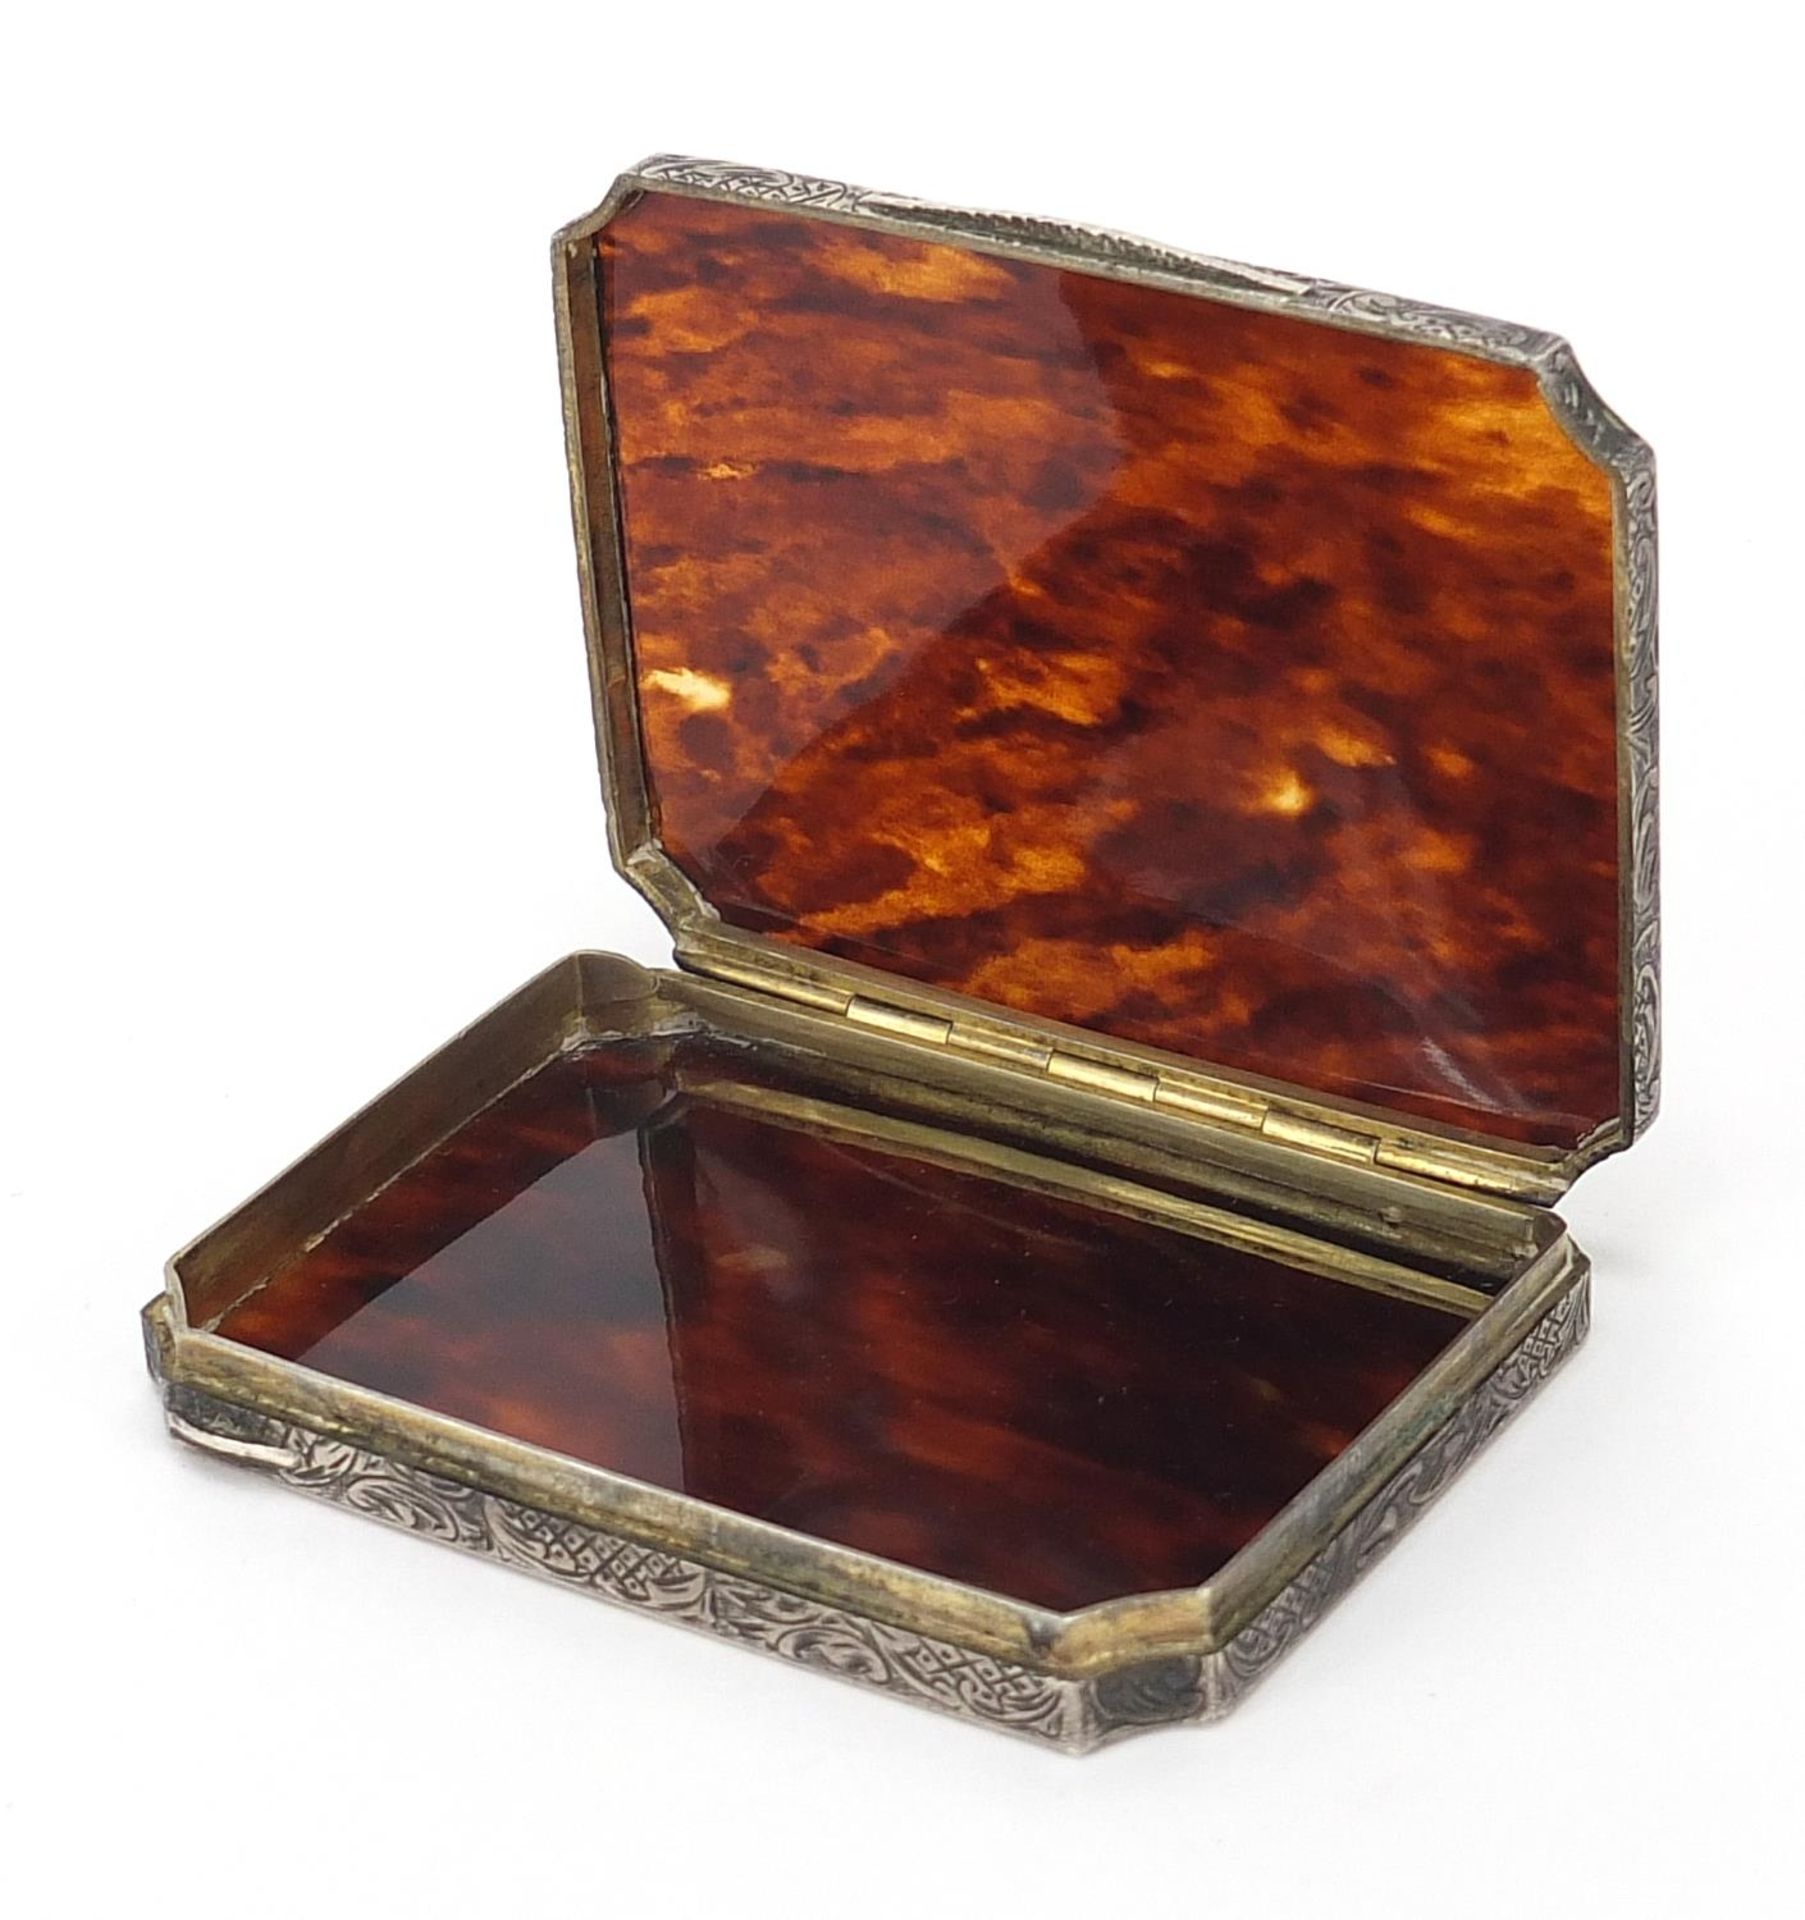 Continental silver and tortoiseshell box with hinged lid and engraved decoration, indistinct - Image 2 of 5